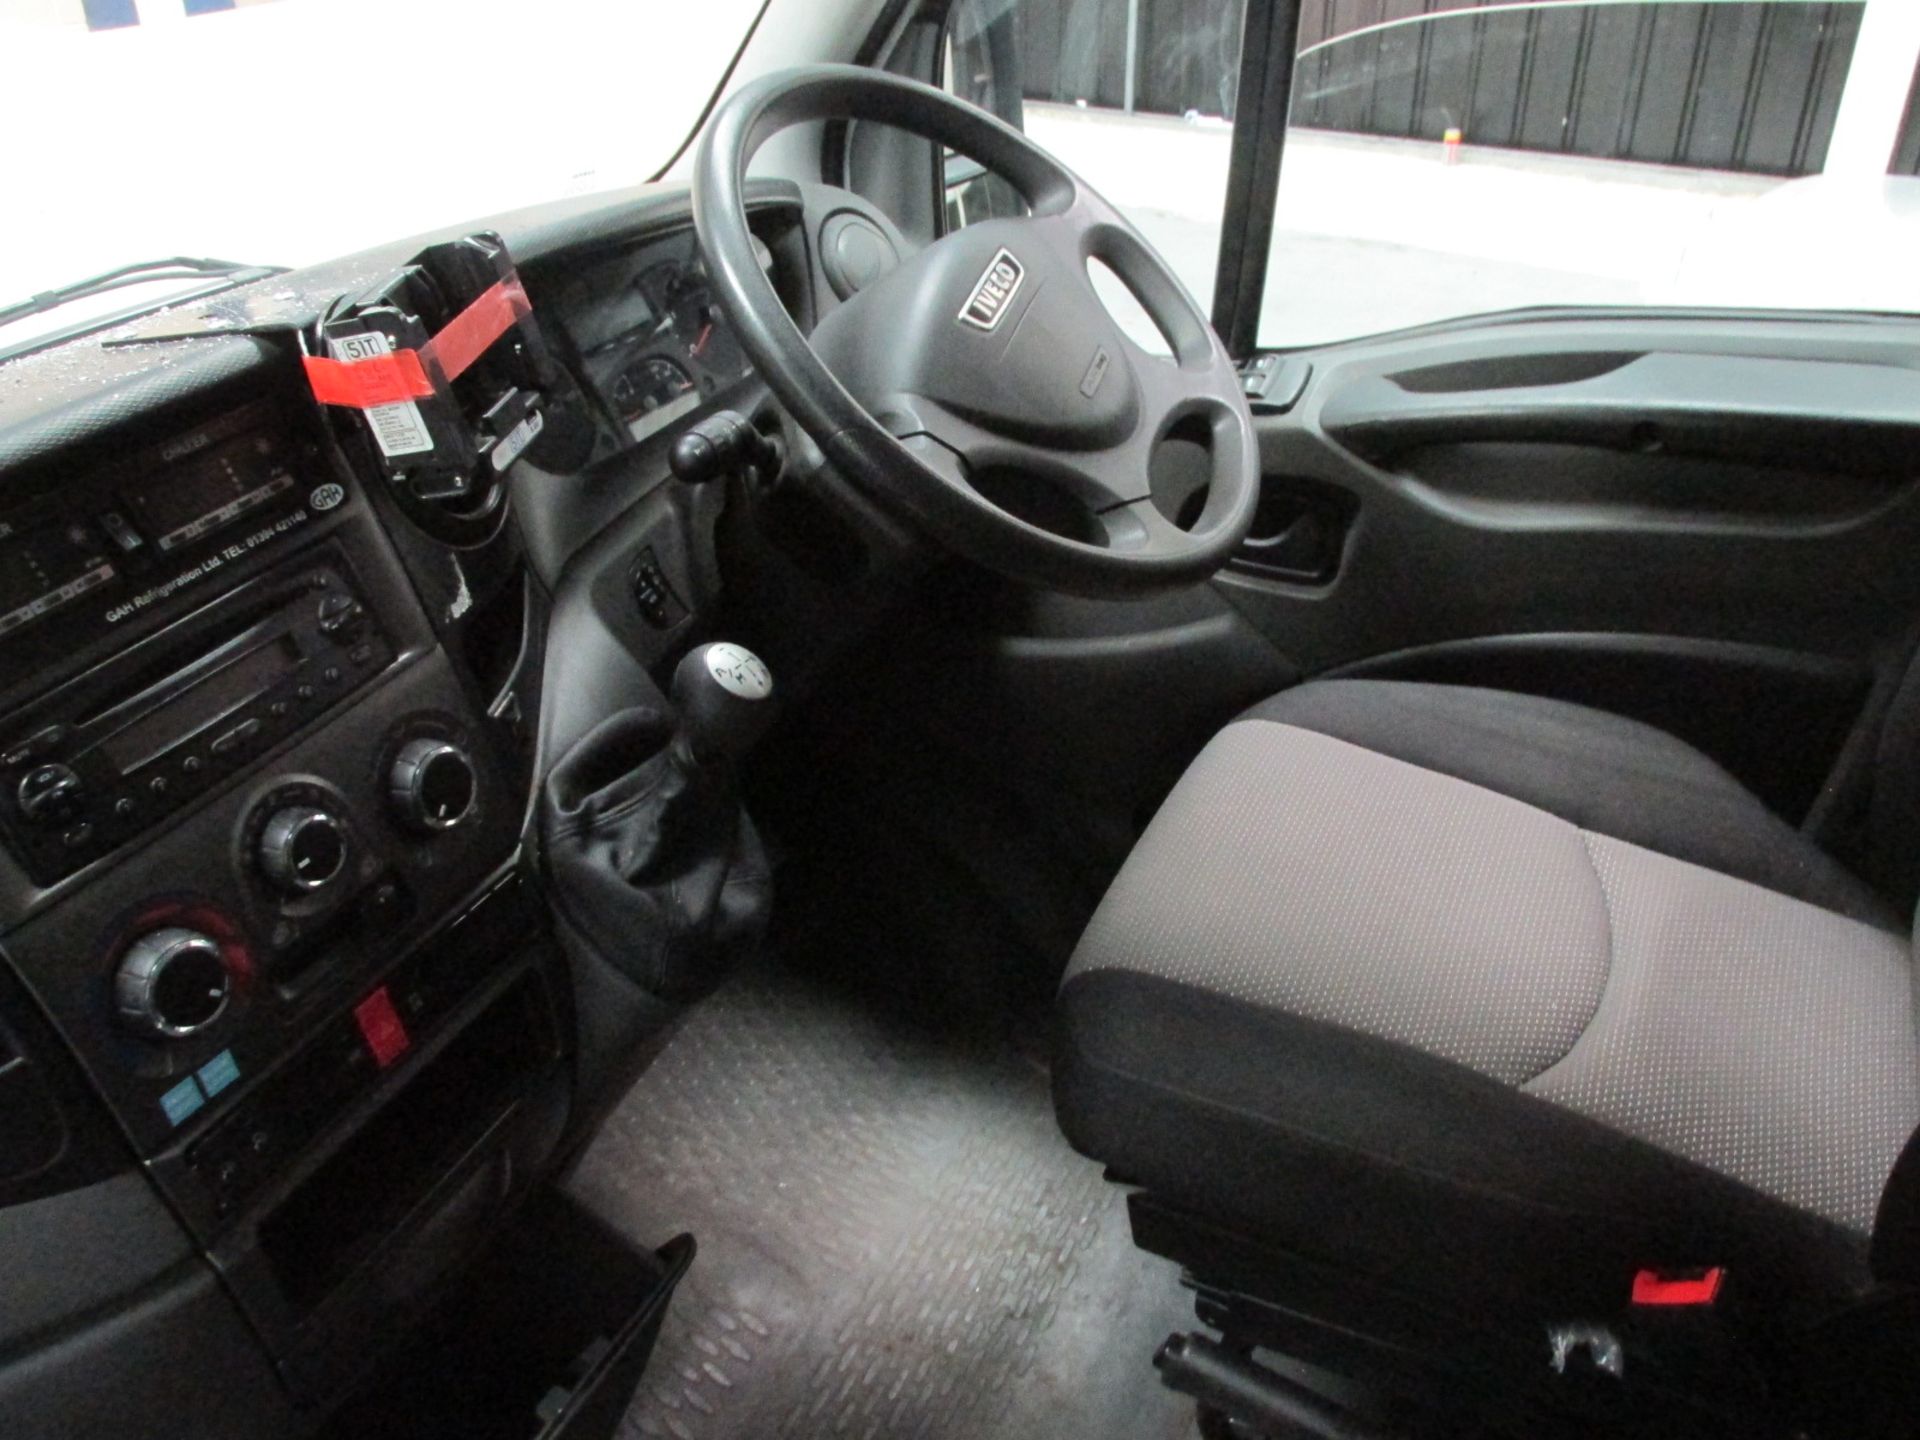 2014 Iveco Daily 35S11 3750 WB 2.4 HPi - Image 17 of 17